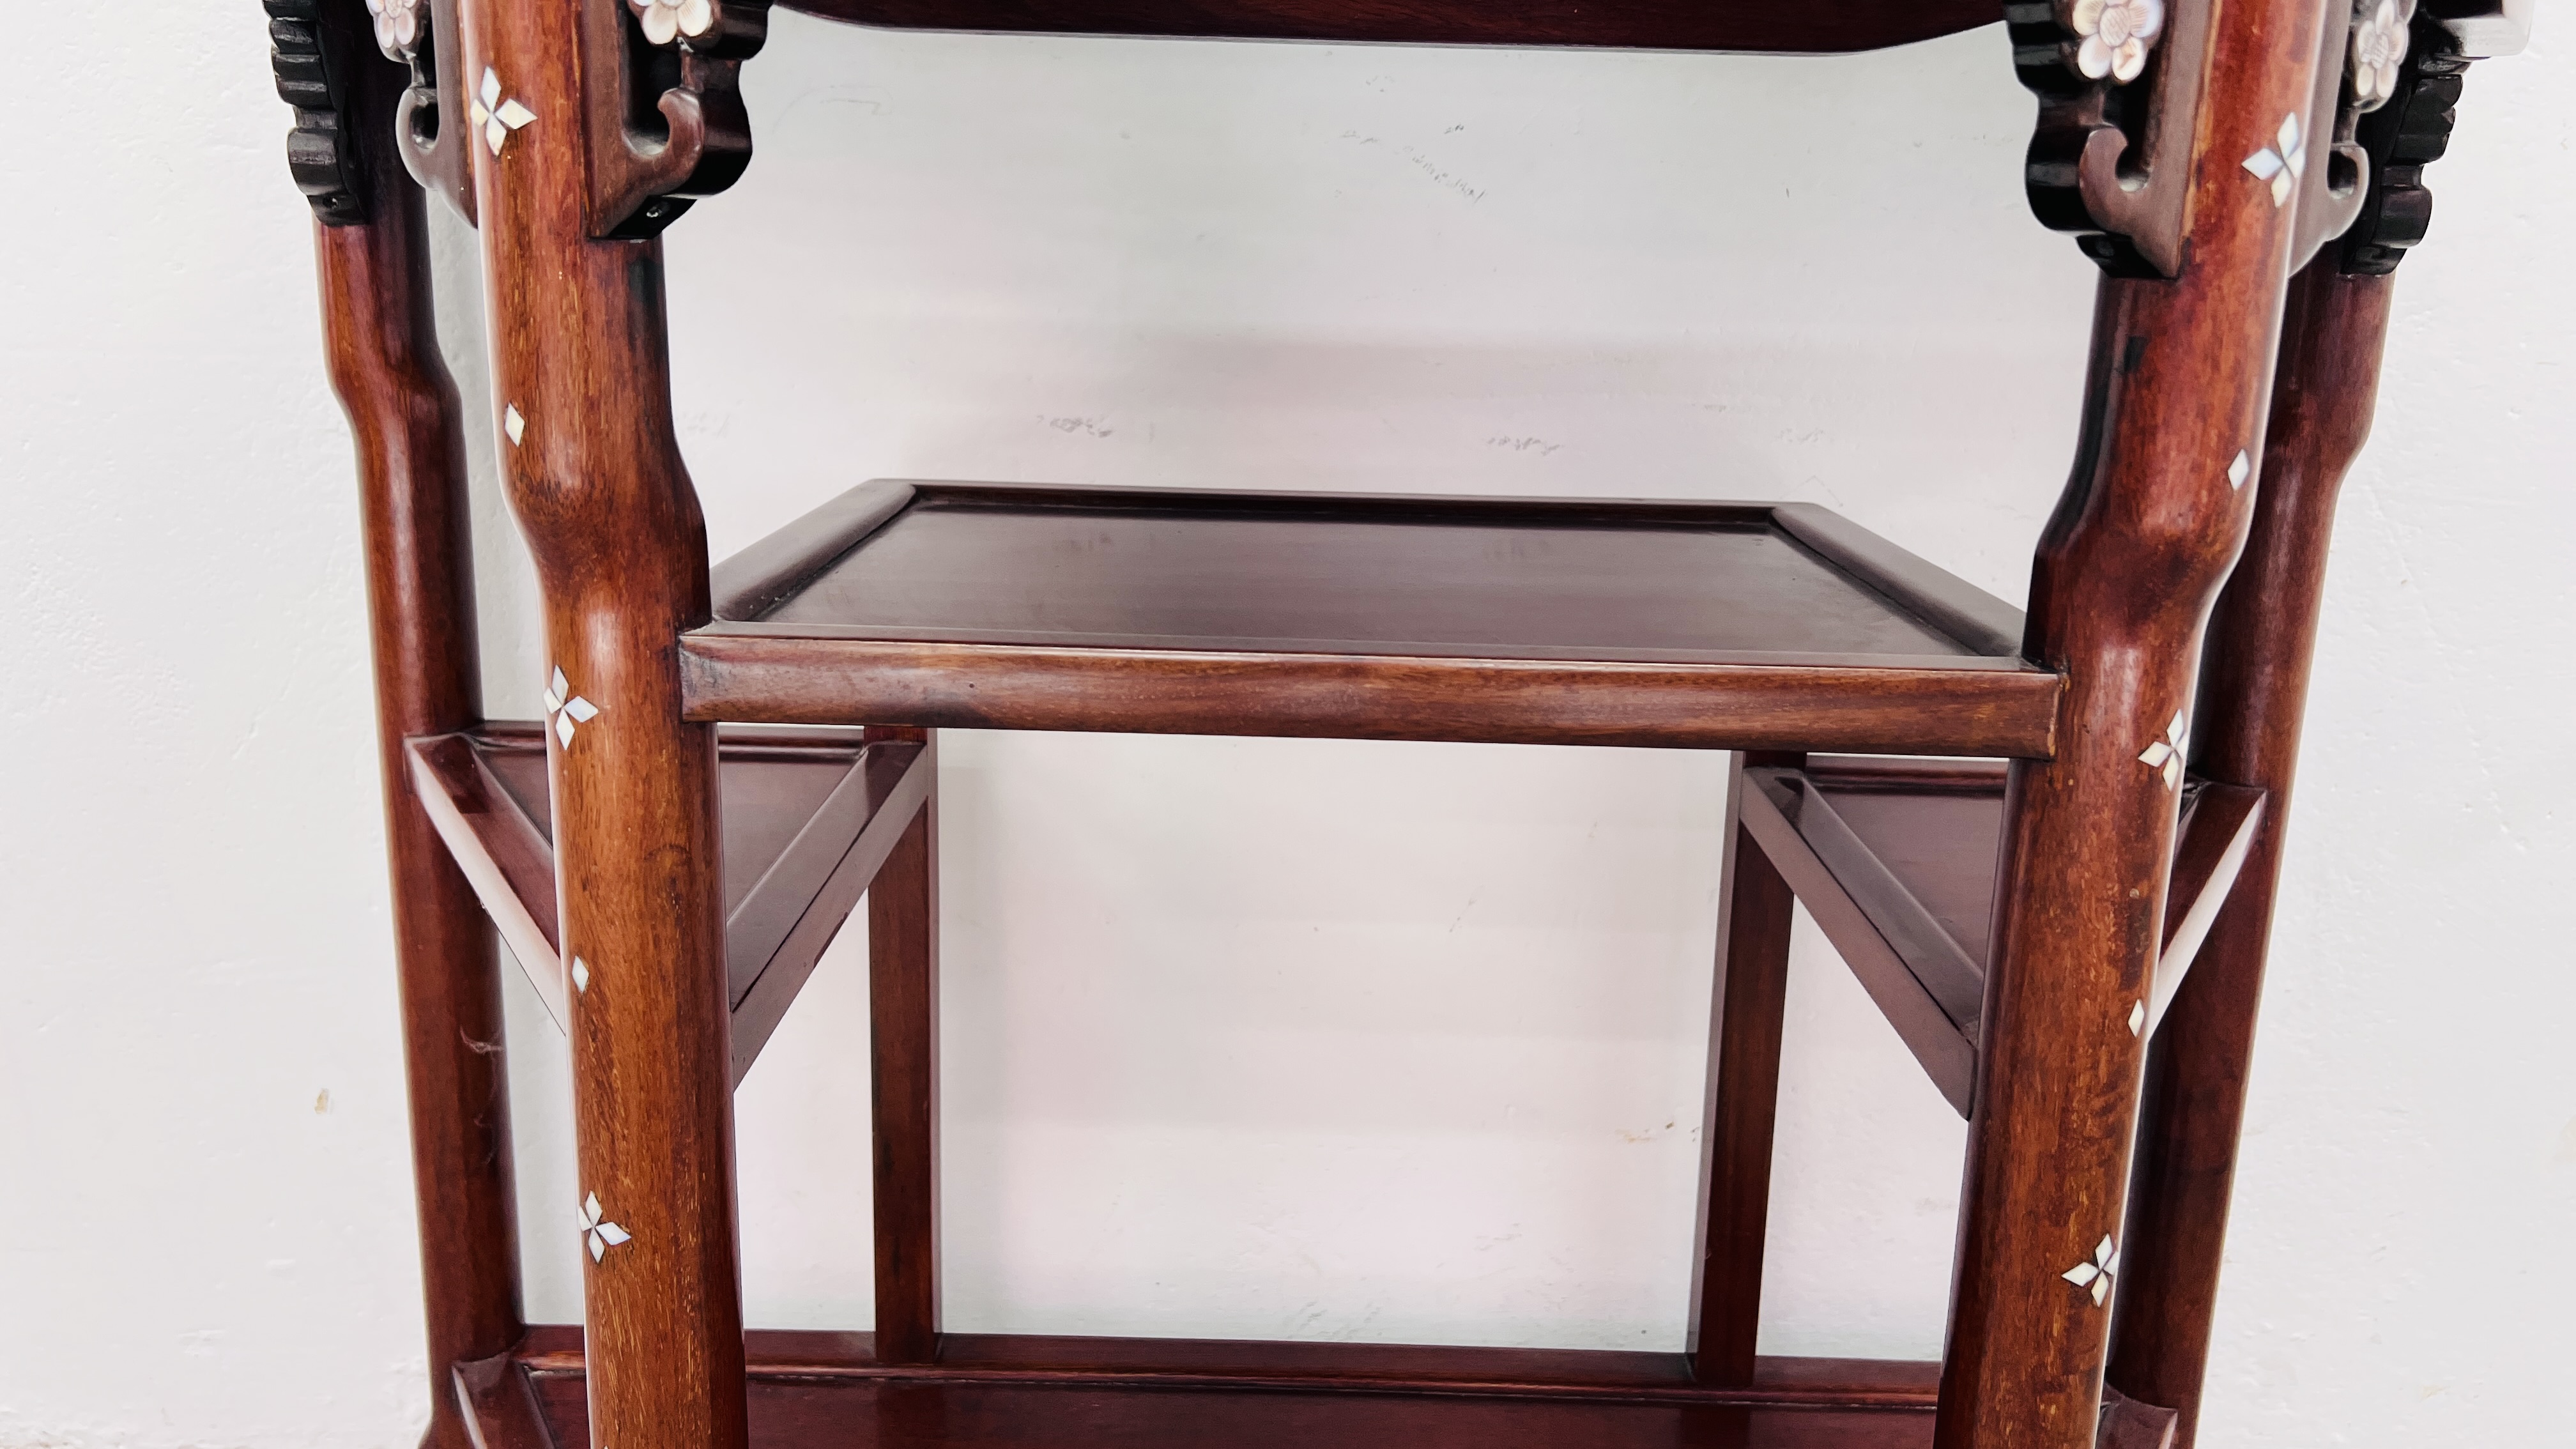 AN ORIENTAL HARDWOOD AND MOTHER OF PEARL INLAID SIDE TABLE WITH SHELF BELOW. - Image 4 of 9